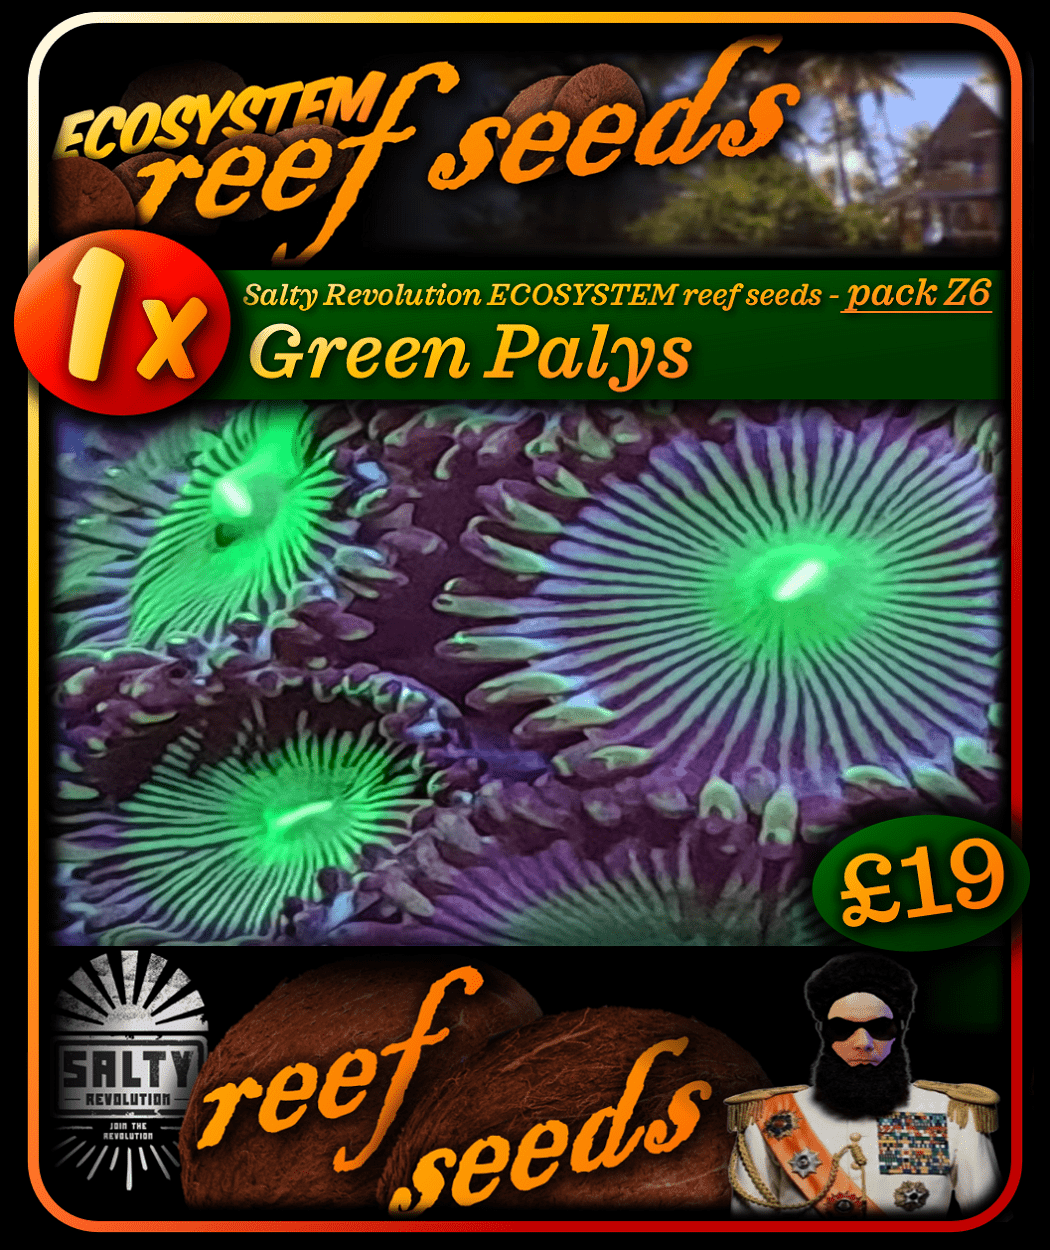 ECOSYSTEM reef seeds - Coral pack Z6 - 1x Green Paly coral